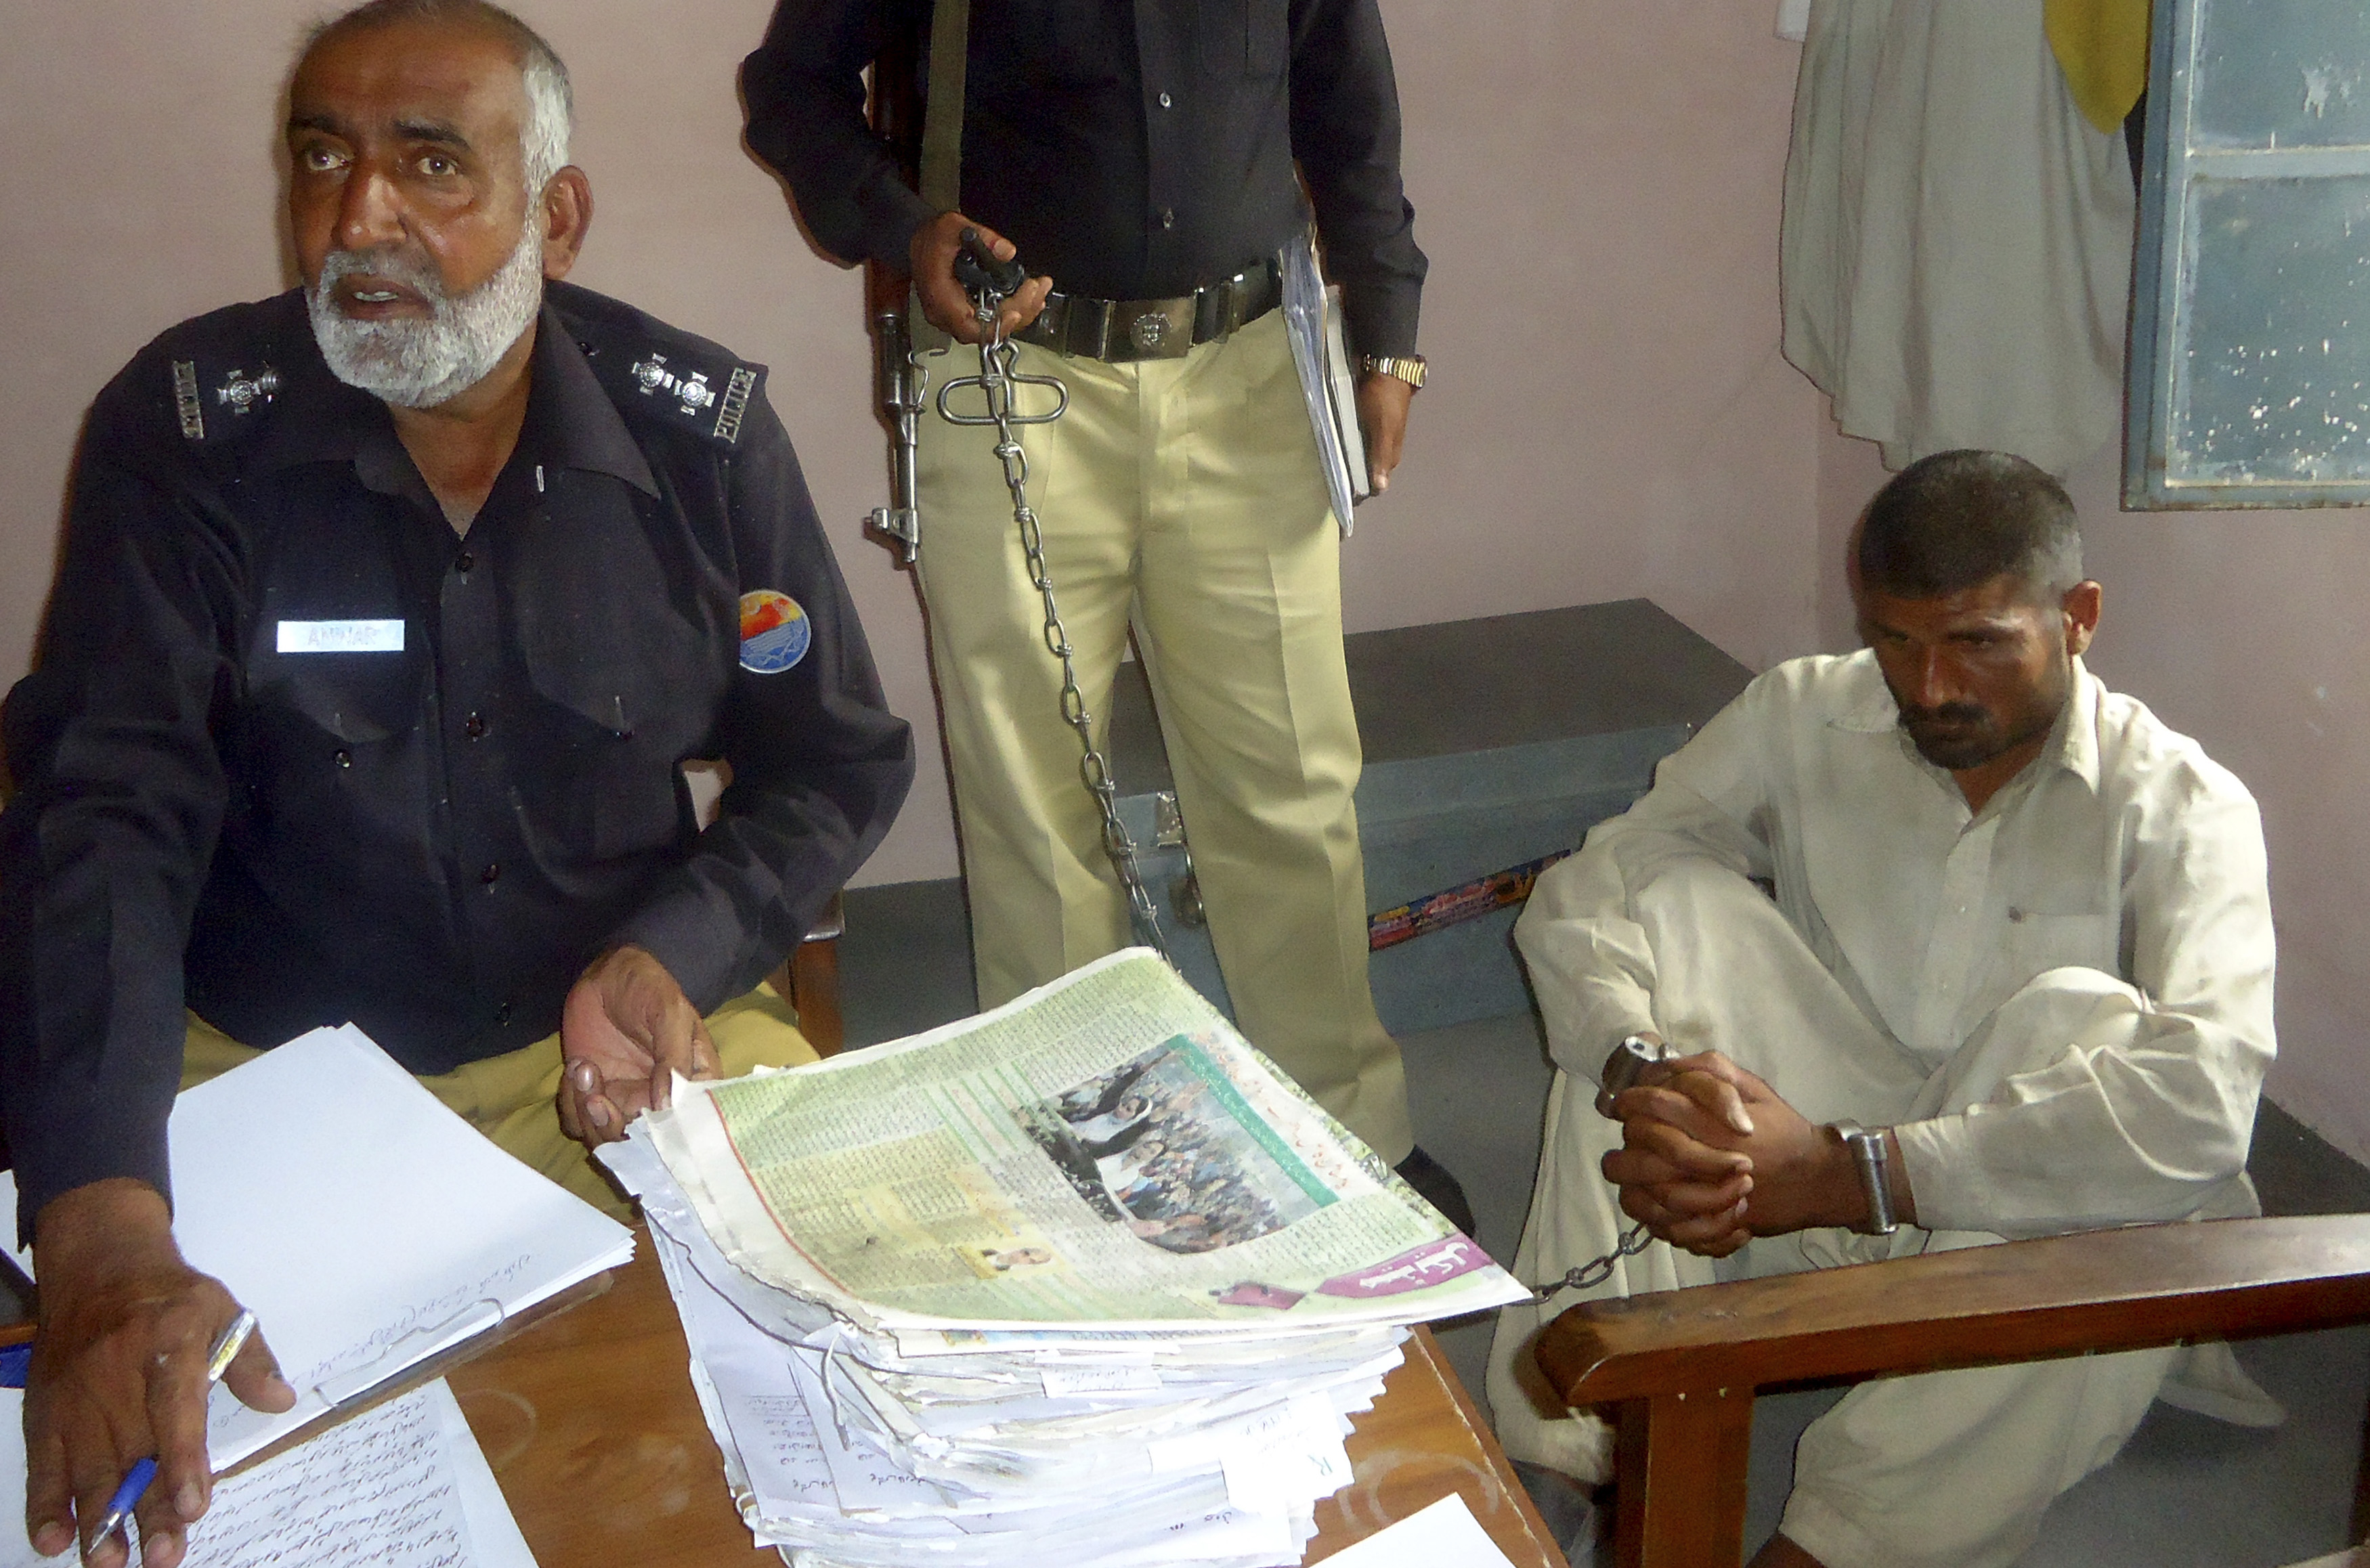 Mohammad Arif Ali, 35, right, sits in custody at a police station in the town of Darya Khan in Bhakkar district, Pakistan's Punjab province, on April 14, 2014. (Reuters)